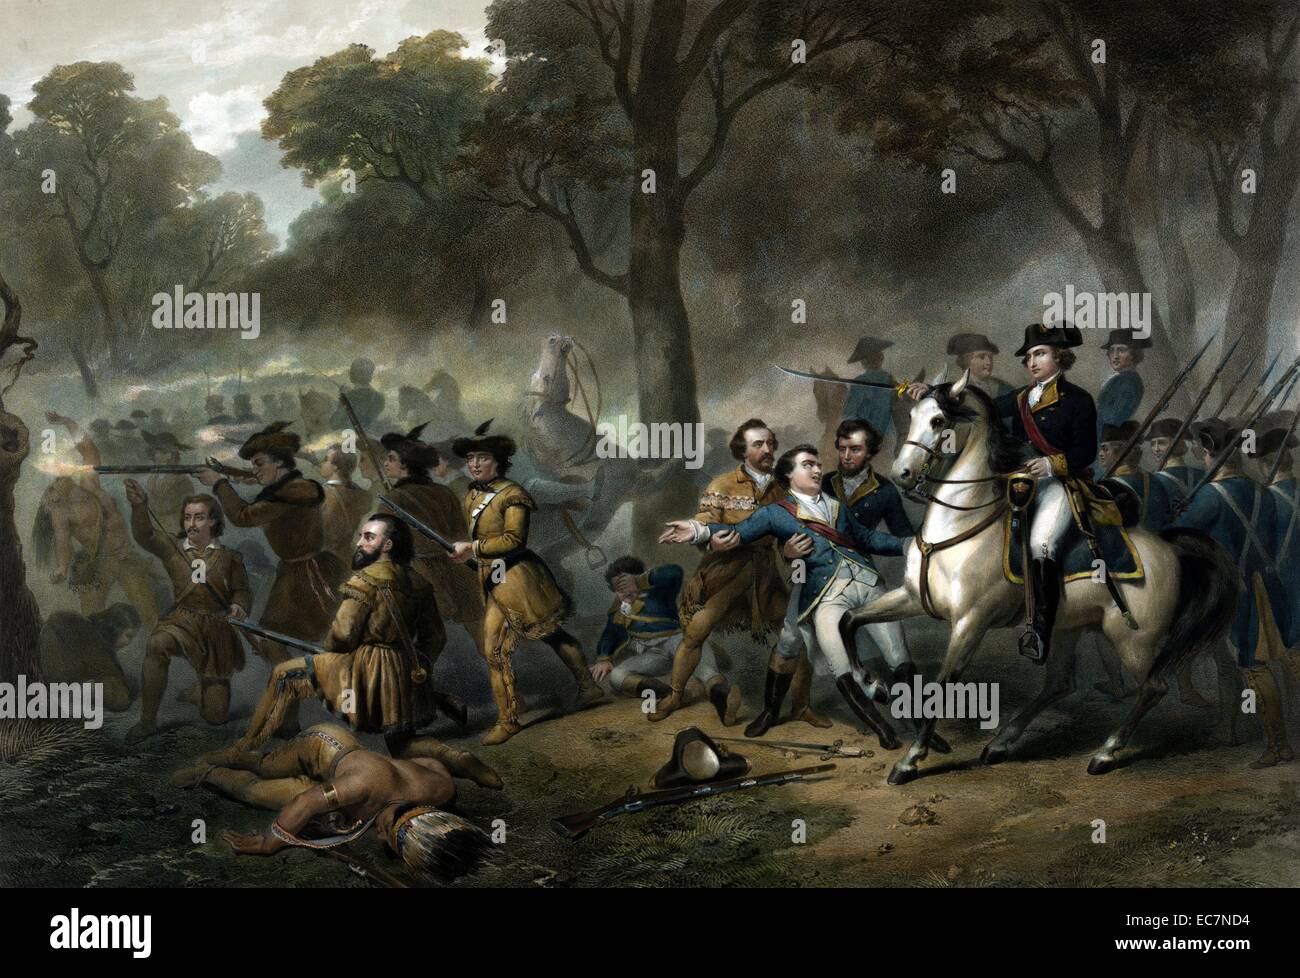 Life of George Washington - The Soldier. George Washington on horse, soldiers fighting during the battle of the Monongahela. Stock Photo